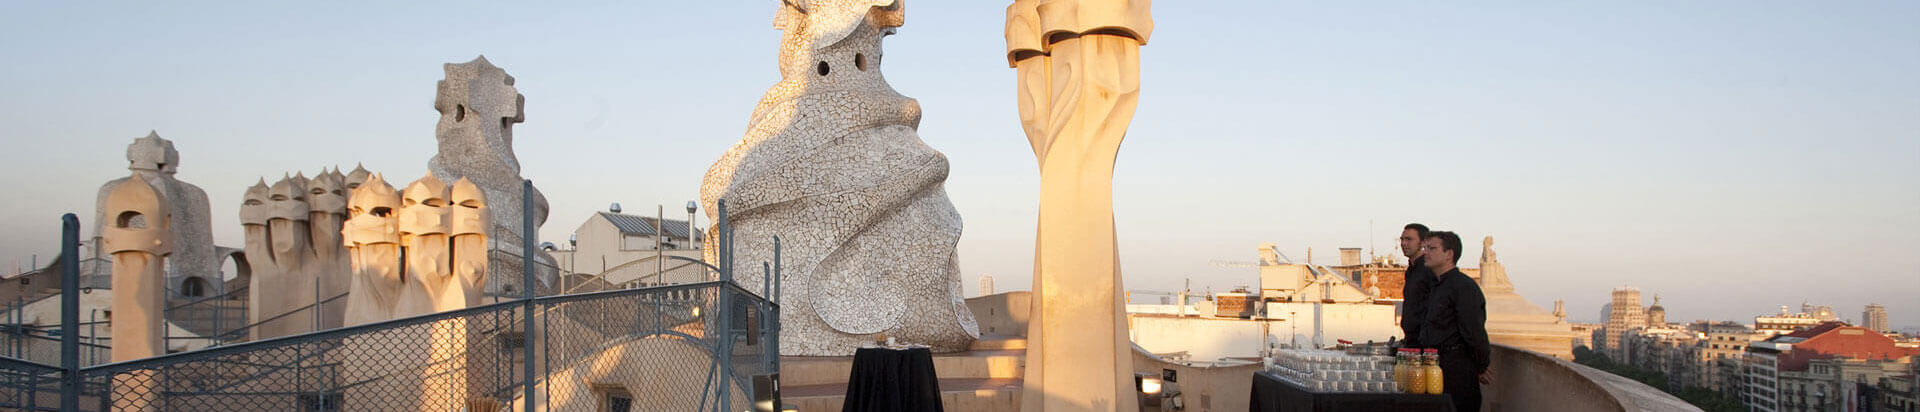 pedrera special exclusive tours barcelona